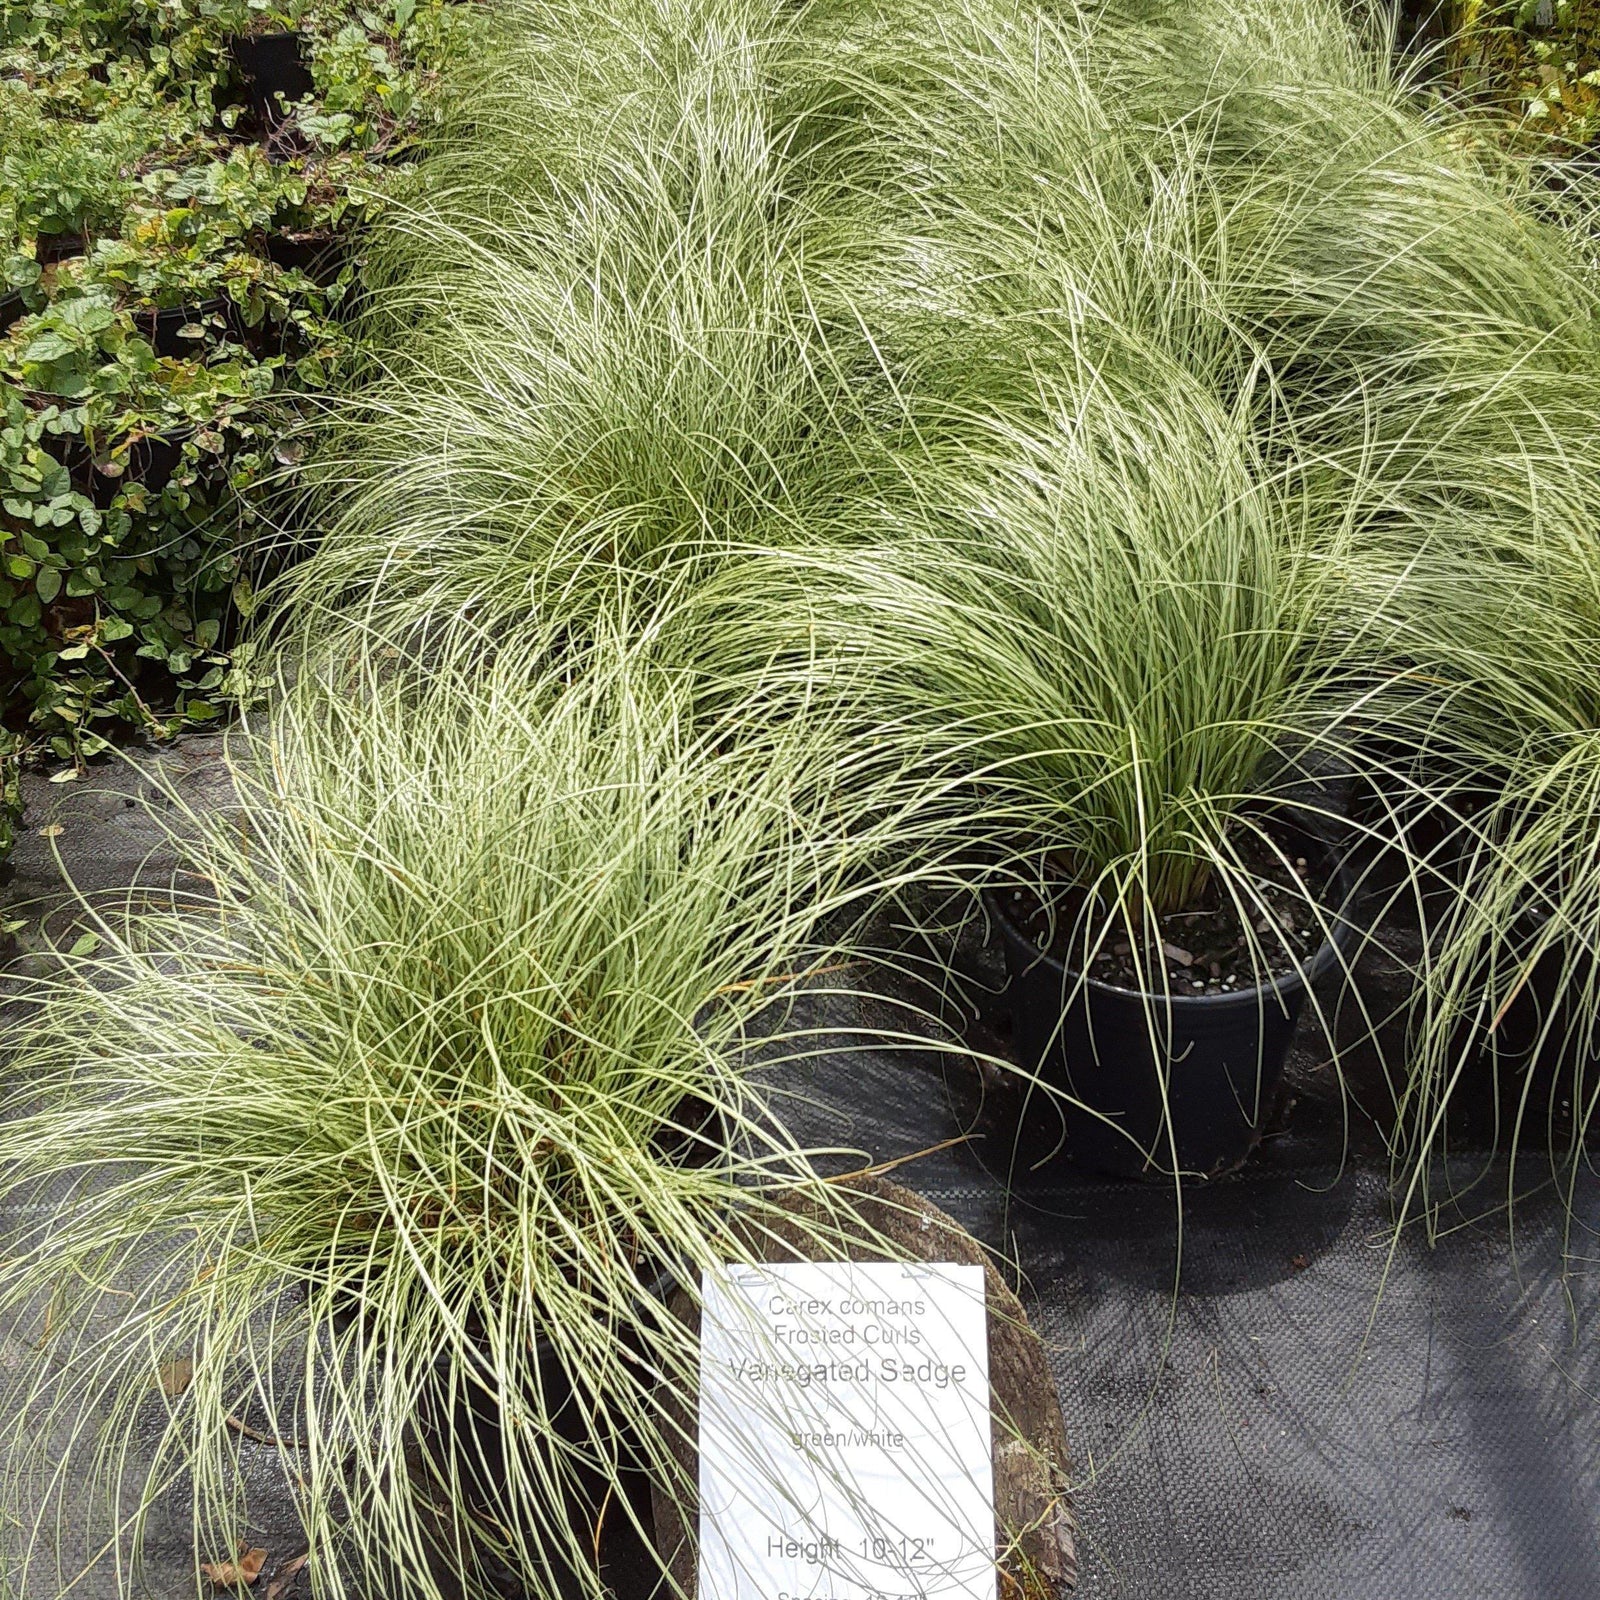 Carex comans 'Frosted Curls' ~ Frosted Curls New Zealand Sedge - Delivered By ServeScape